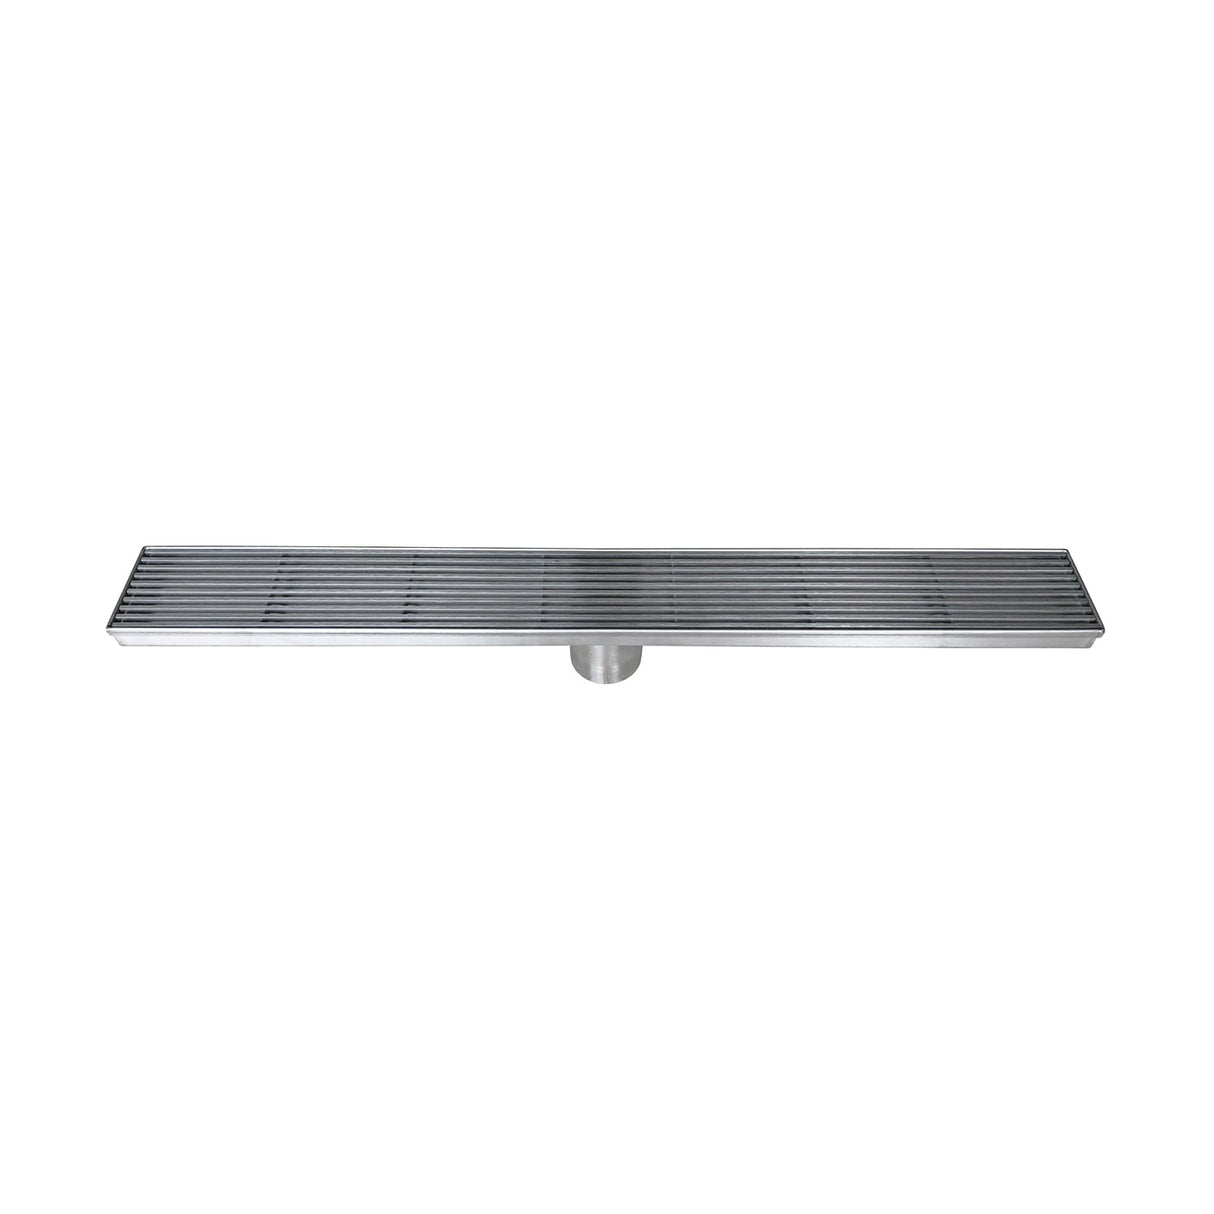 DAX Stainless Steel Rectangular Shower Floor Drain with 18 Gauge, 48", Brushed Stainless Steel DR48-H01